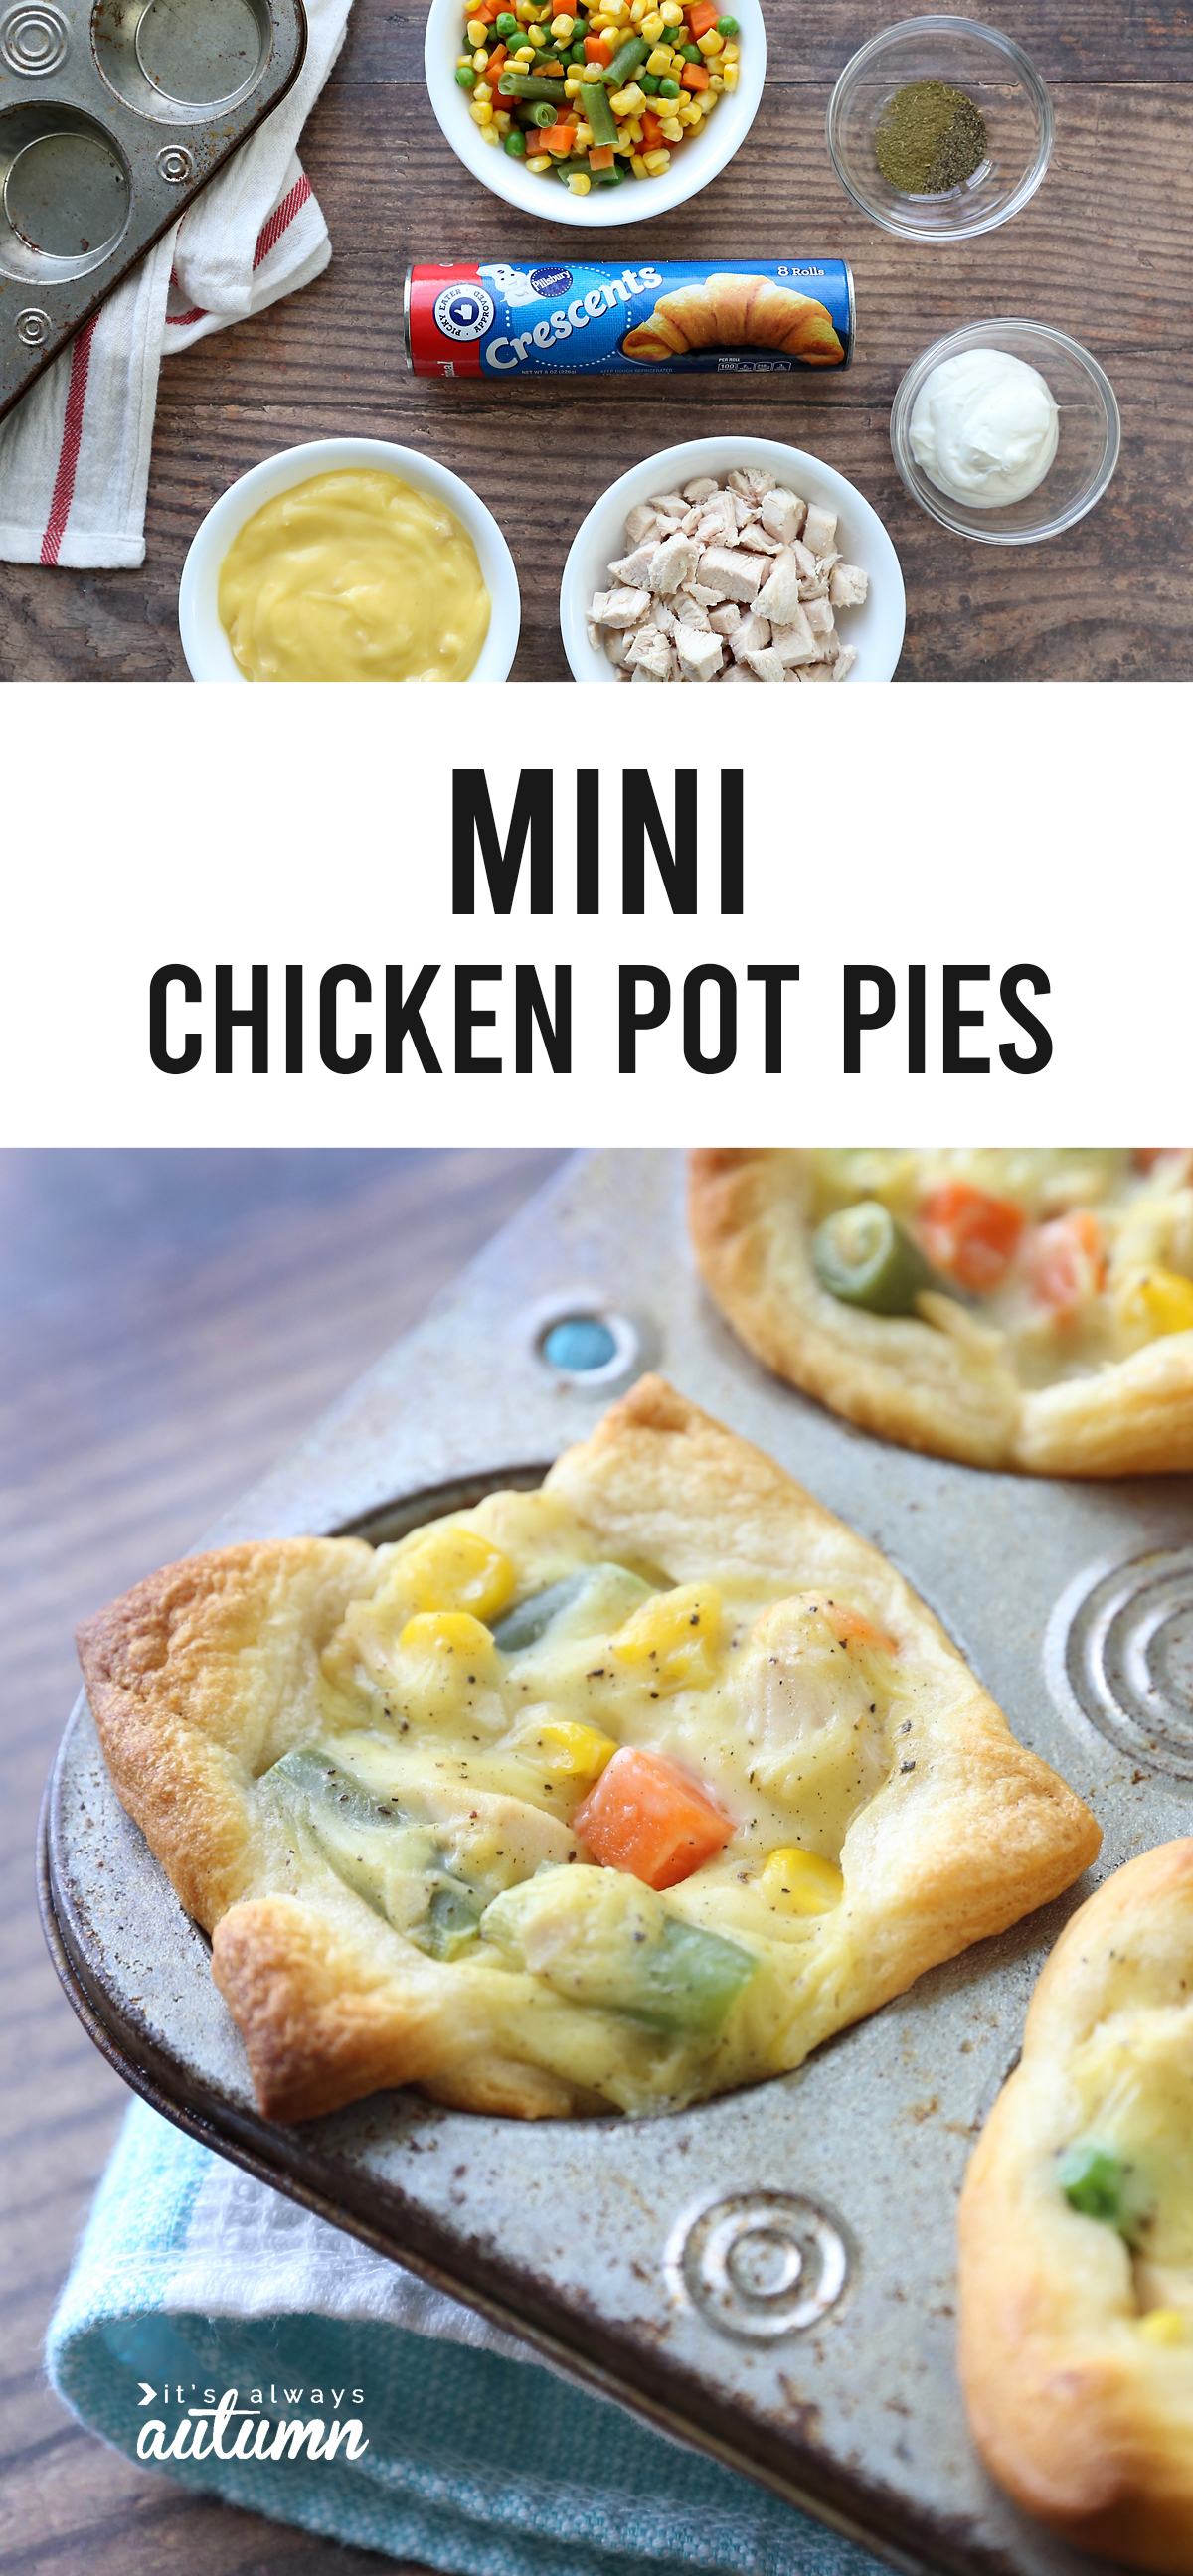 Mini chicken pot pies are super easy to make and taste really delicious! Simple comfort food at it's best. Easy kid friendly dinner idea.